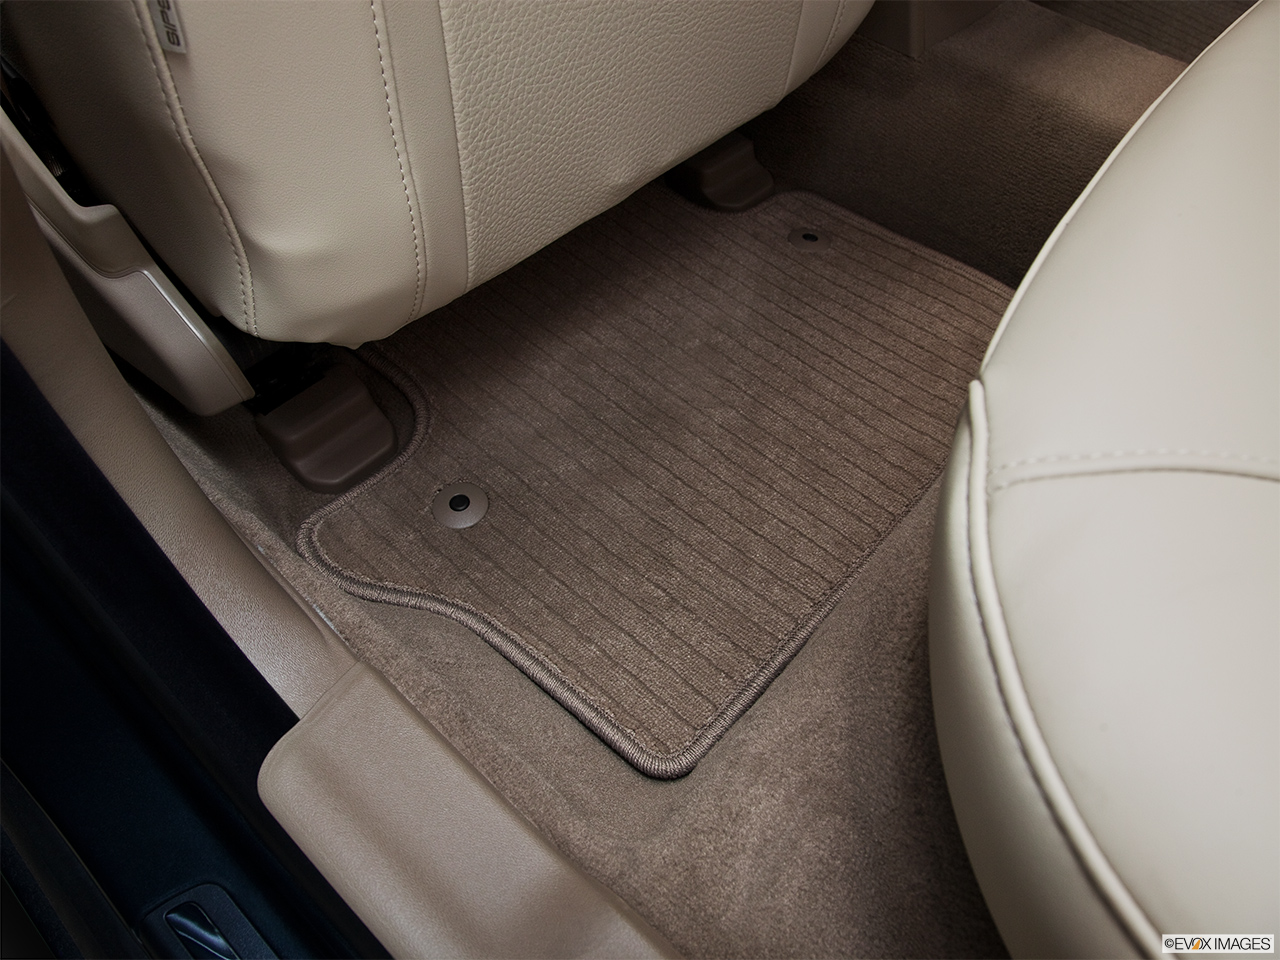 2012 Volvo S80 3.2 Rear driver's side floor mat. Mid-seat level from outside looking in. 